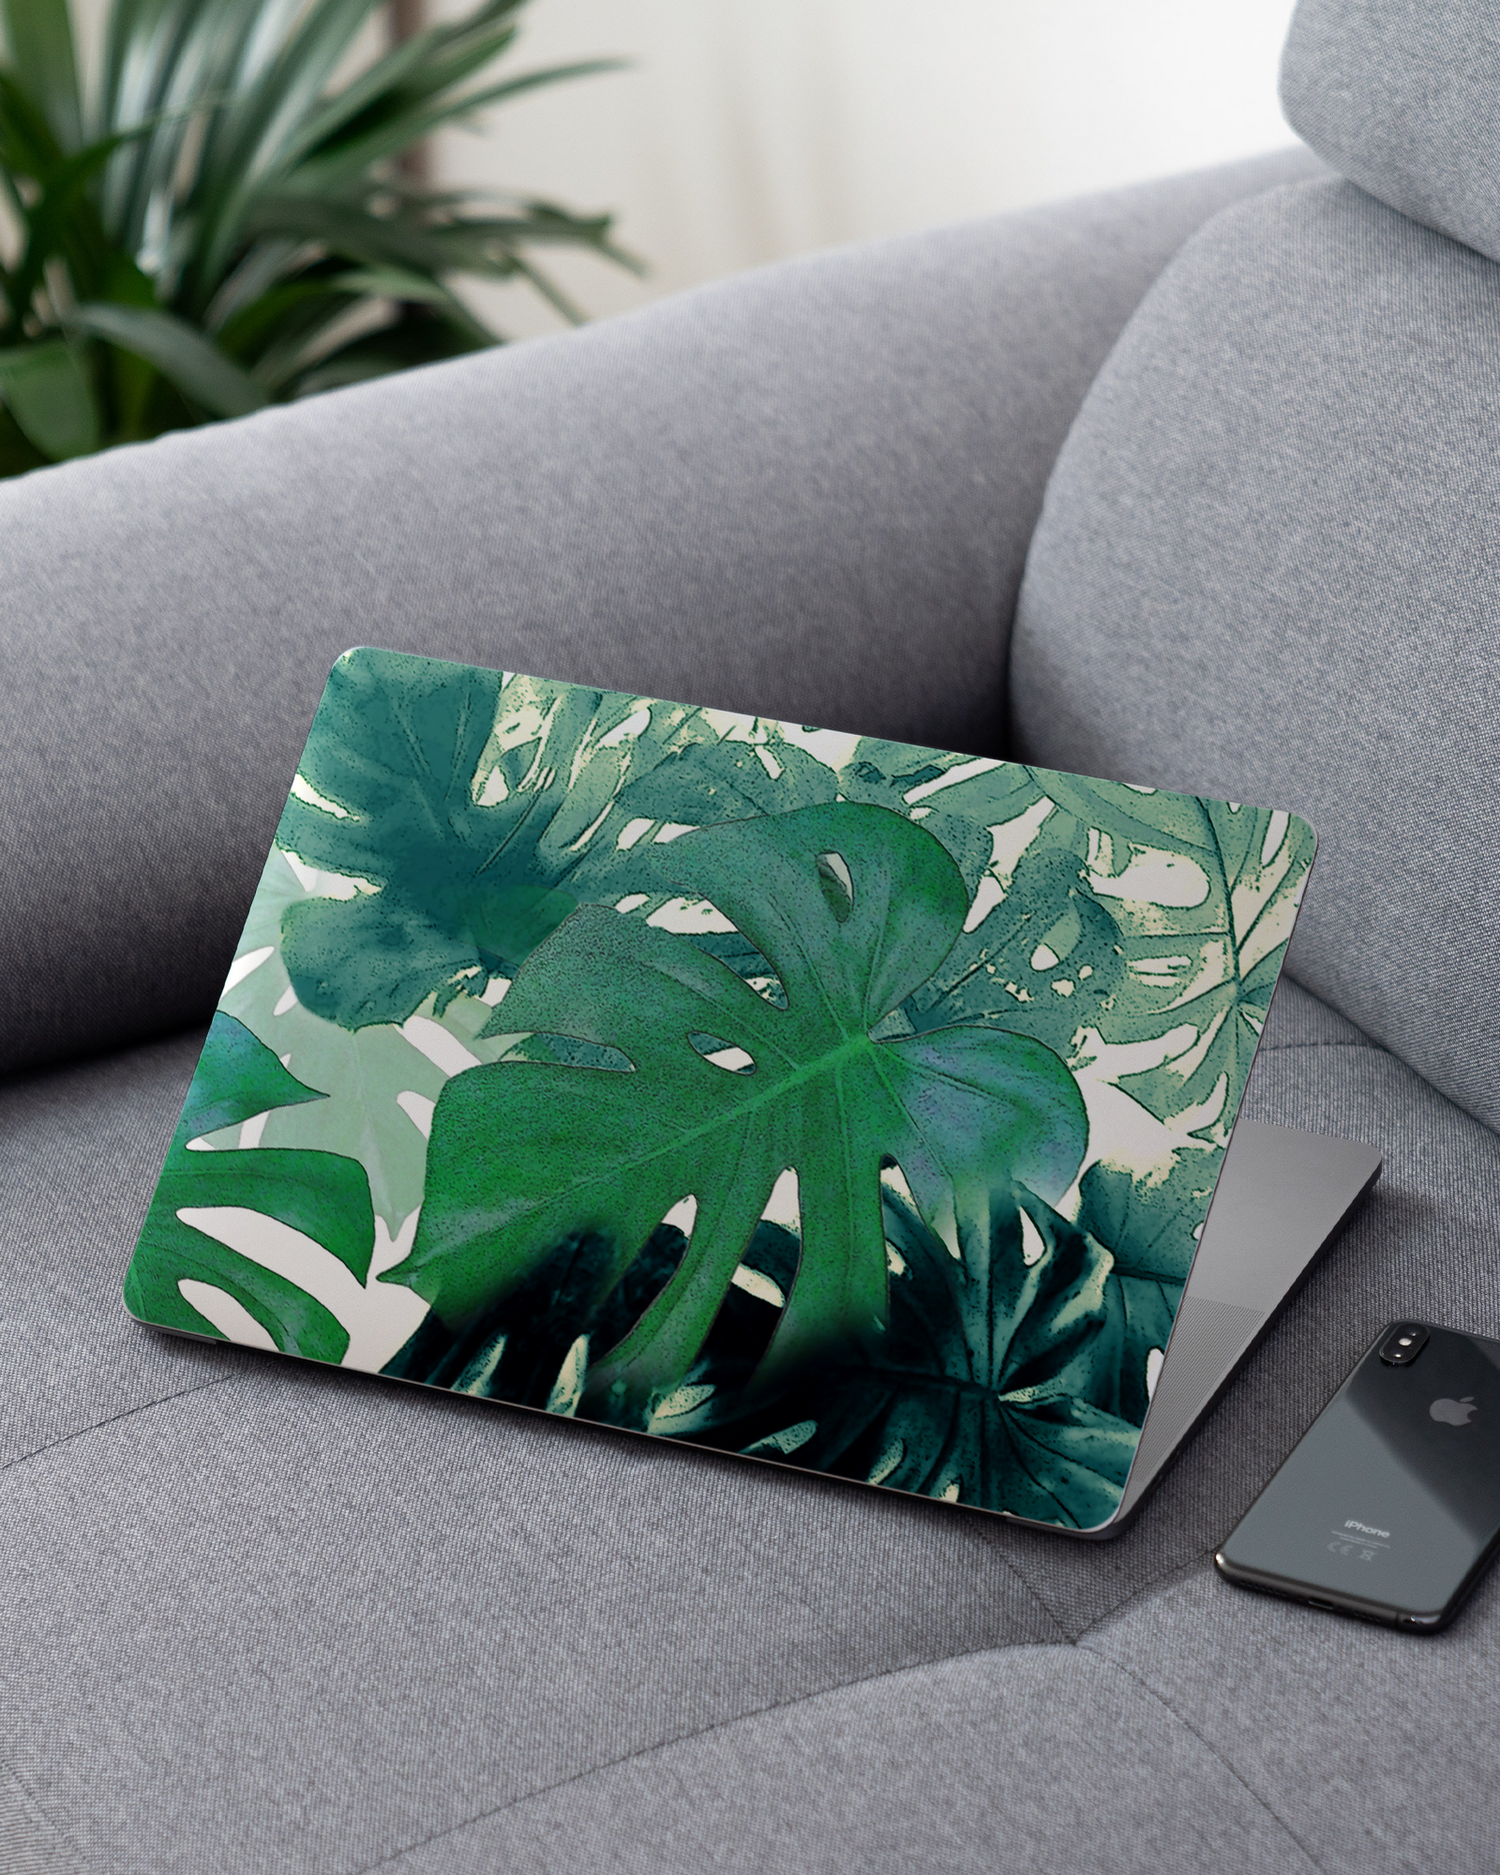 Saturated Plants Laptop Skin for 13 inch Apple MacBooks on a couch